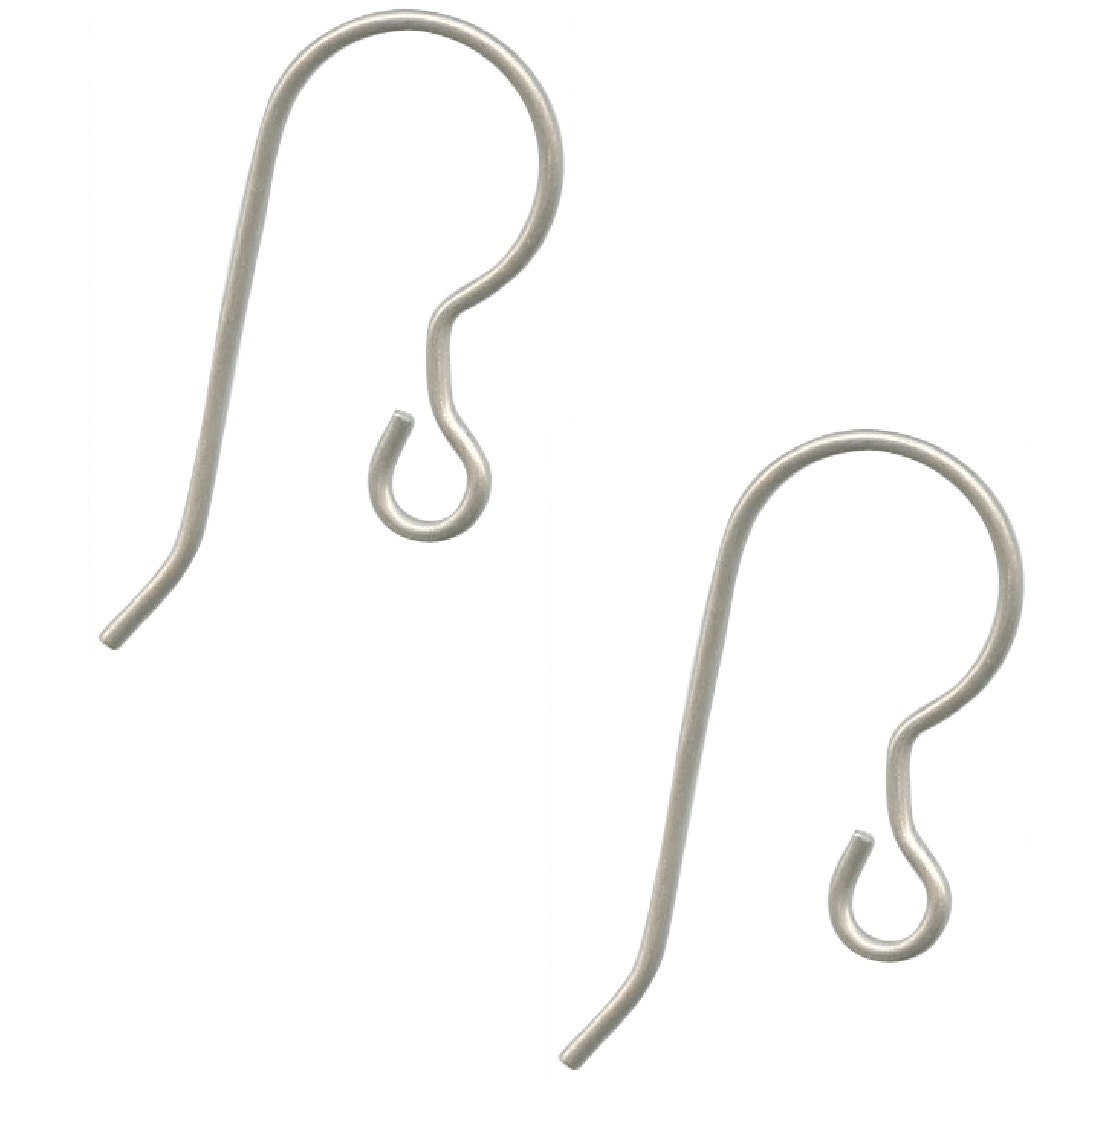 Titanium French Wires for Earrings French Hook style U.S.